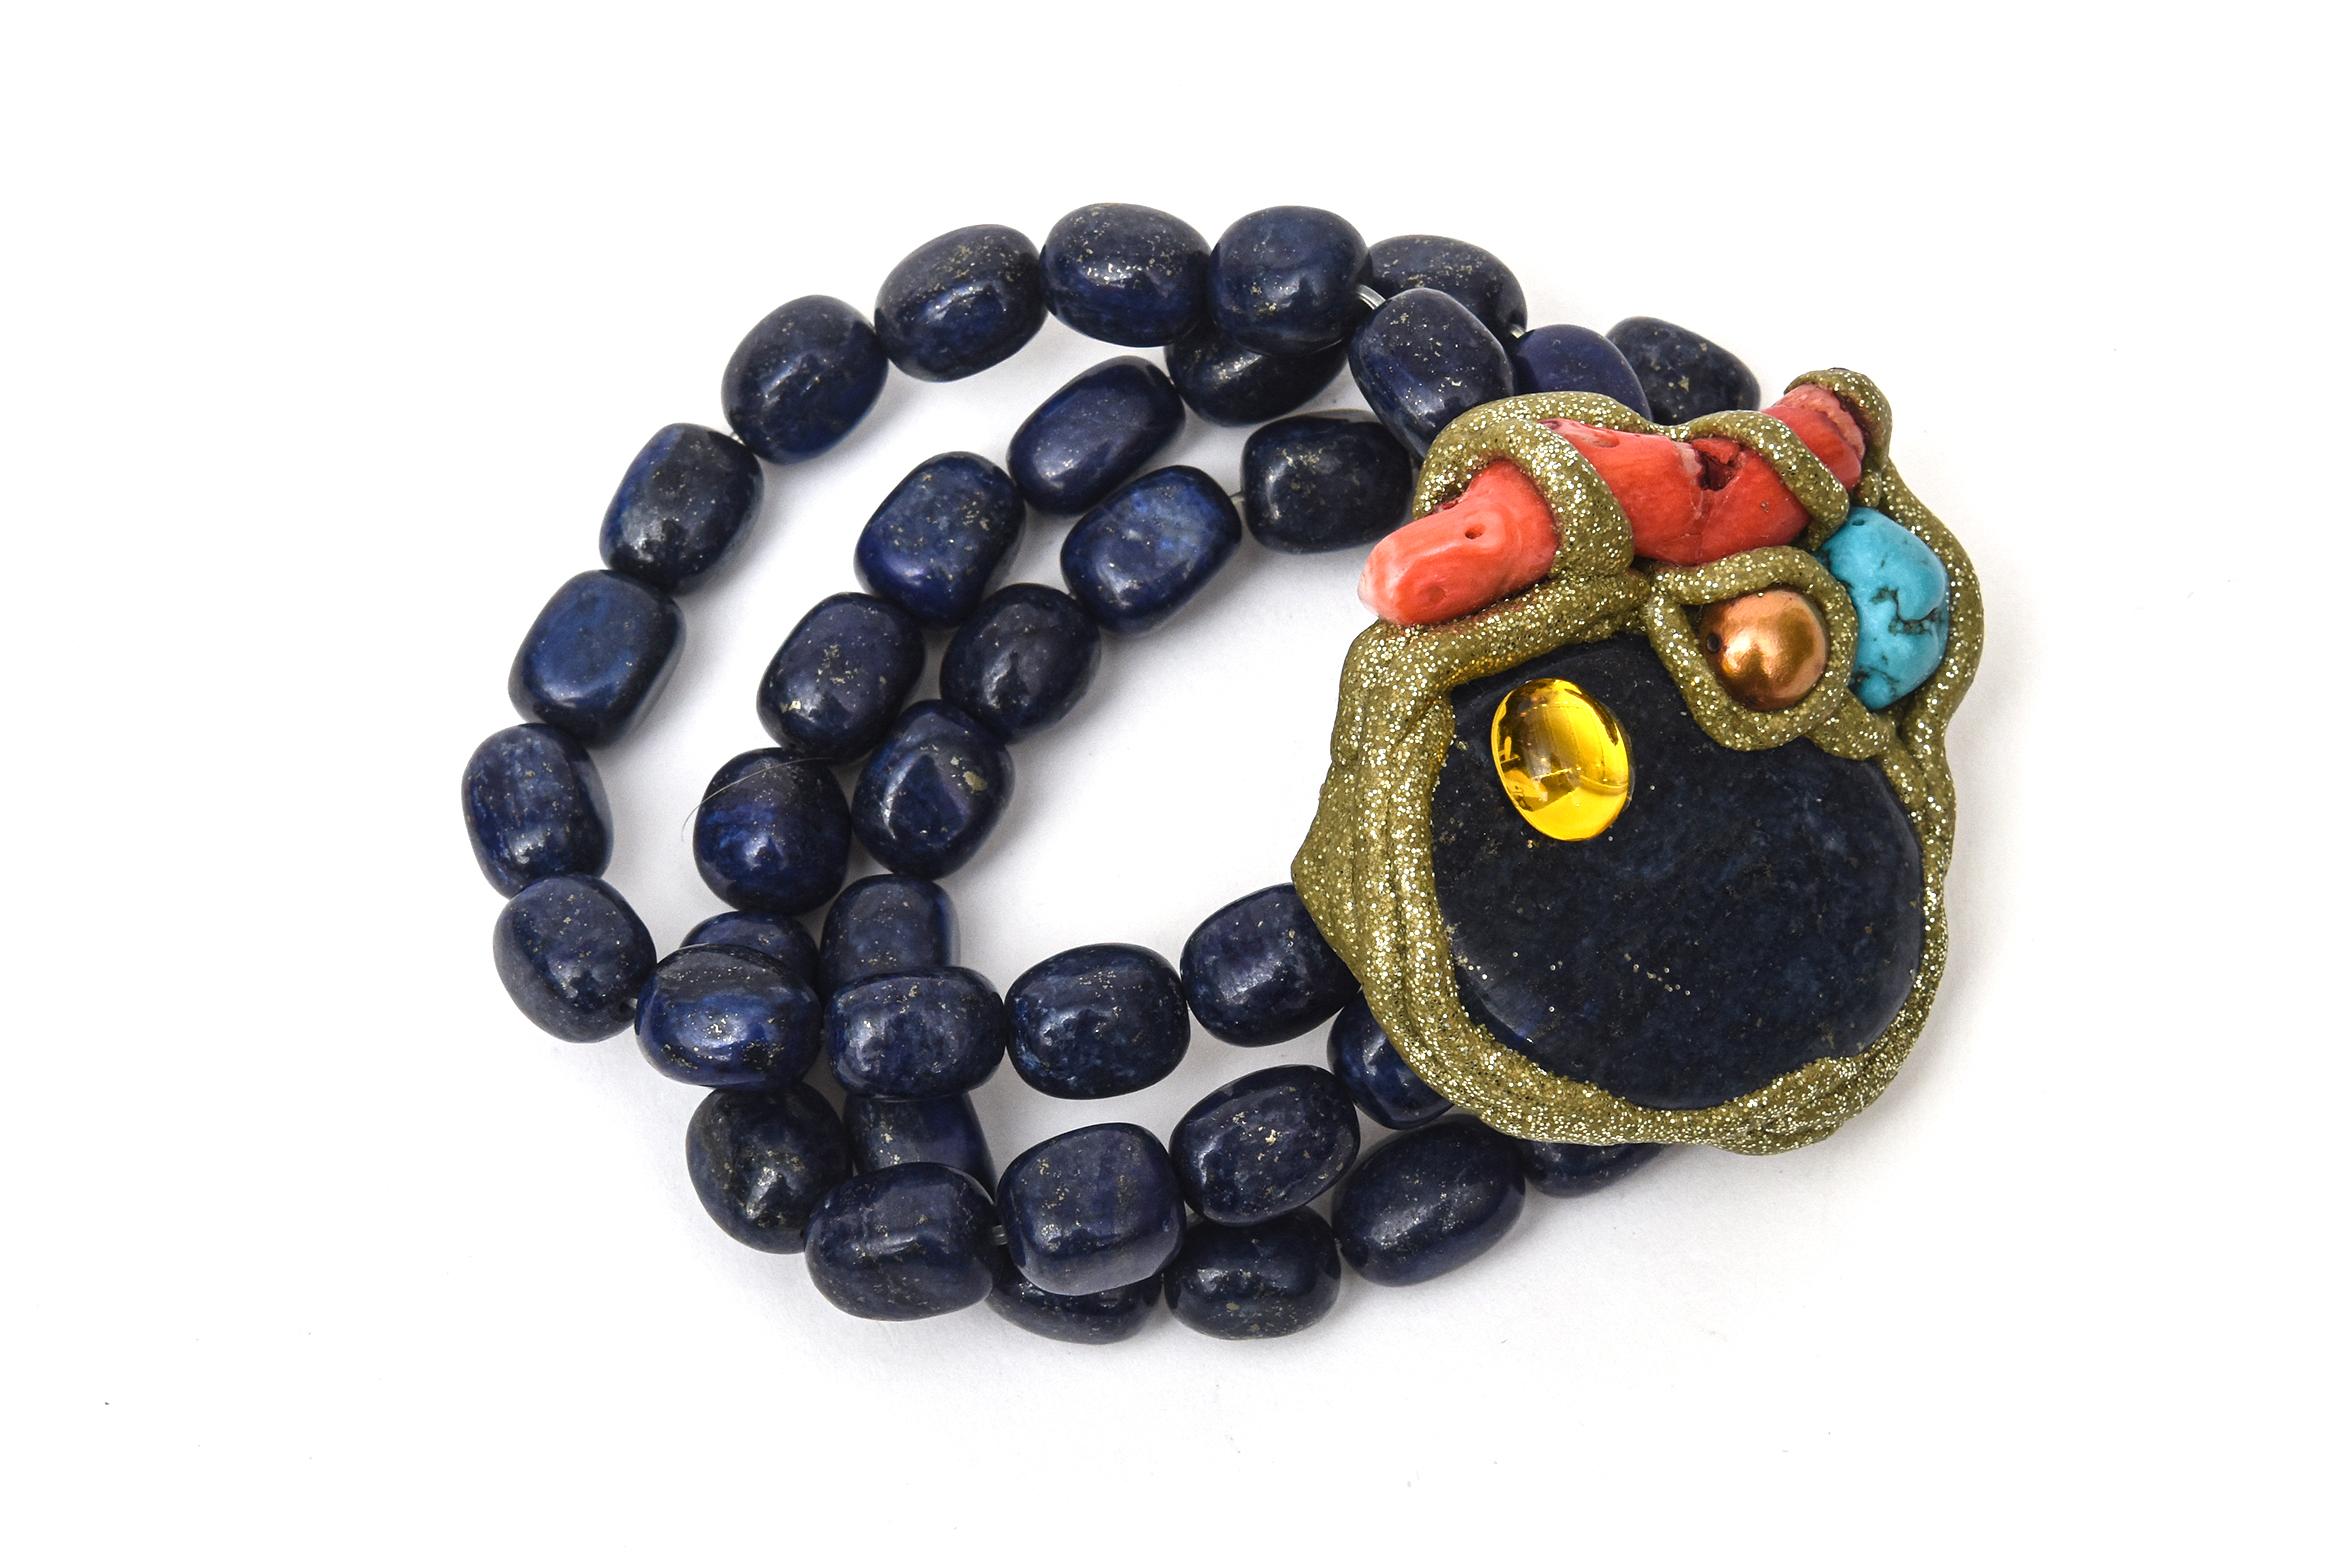 This gorgeous 3 strand hand wrought one of kind bracelet has the elements of lapis beads as the 3 strands with a center medallion of lapis surrounded with citrine, turquoise, coral and copper wrapped wth brass. The 3 strands of lapis stones are